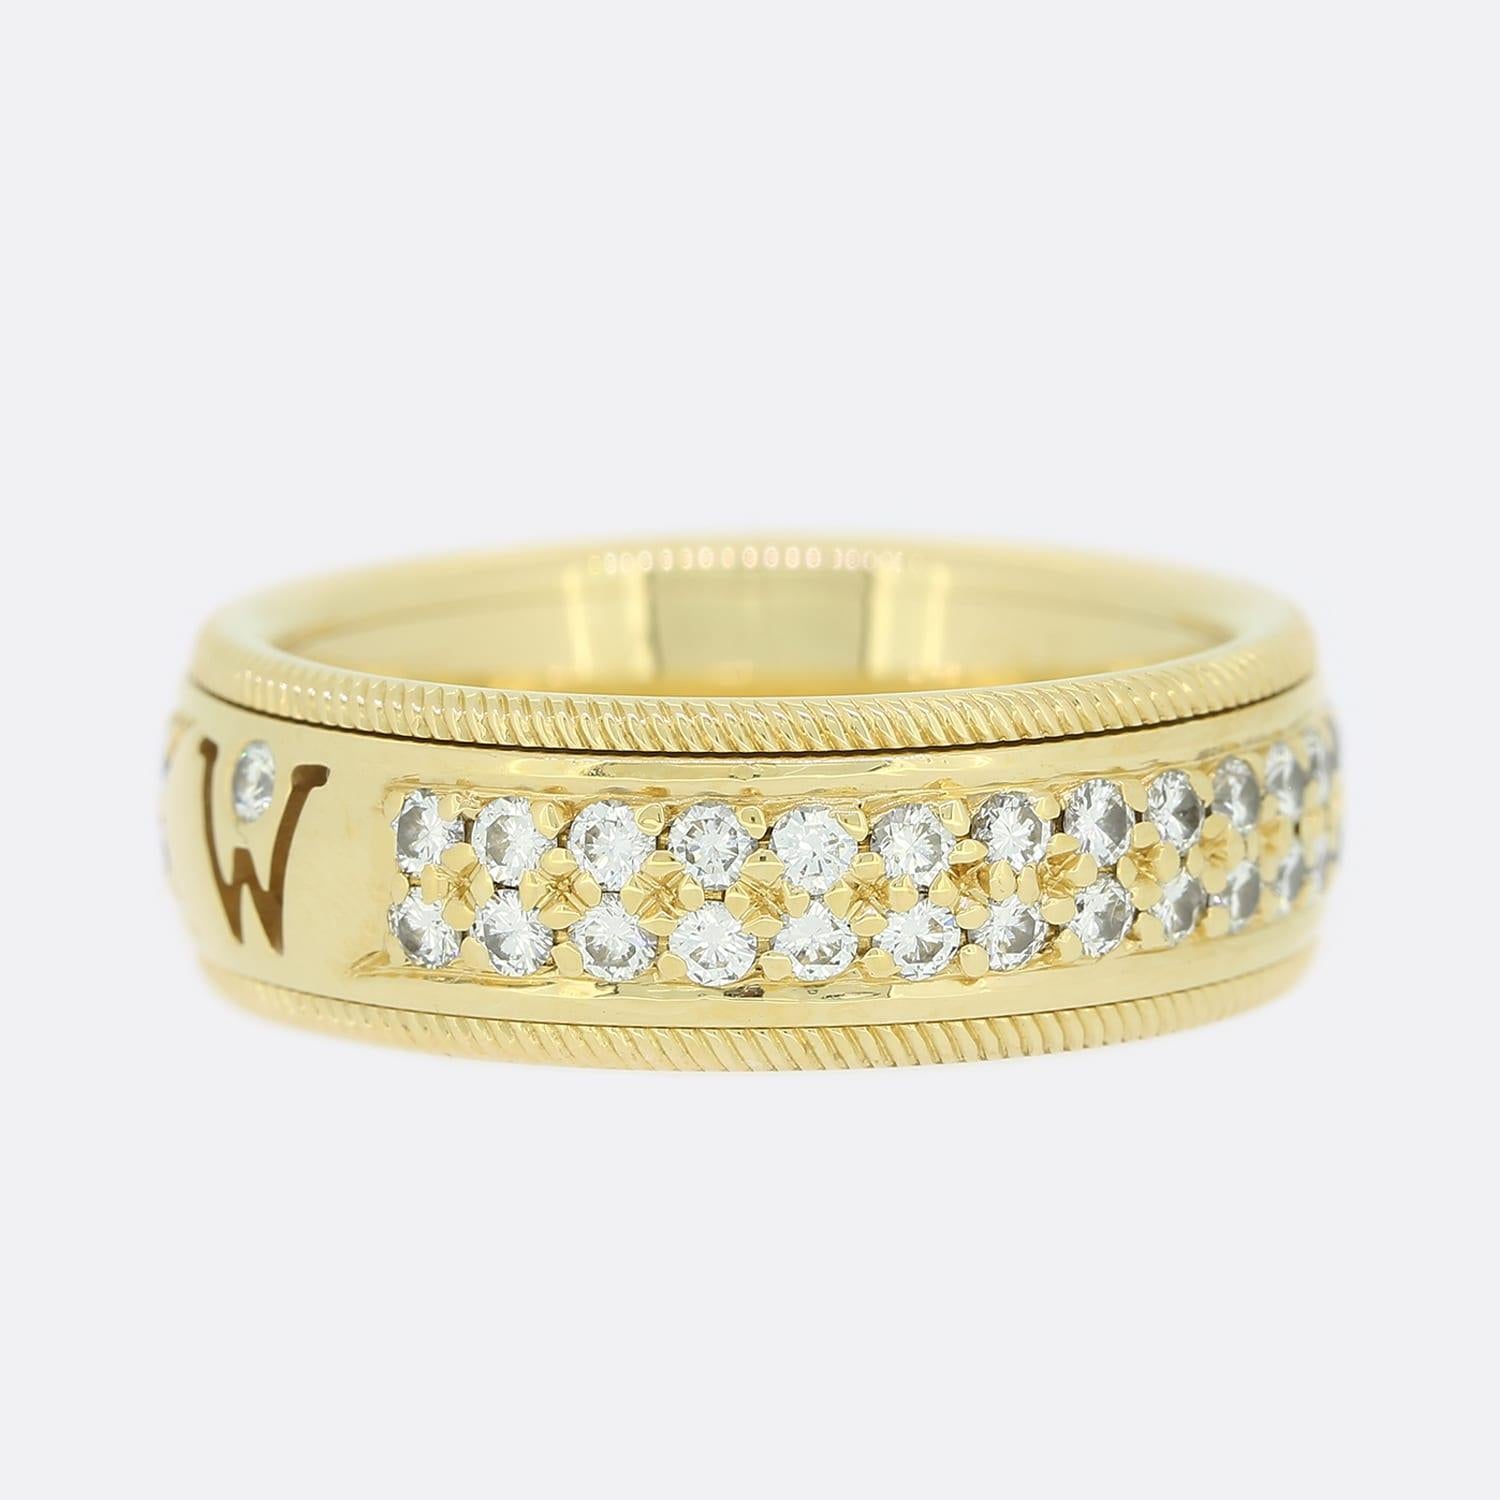 This is an 18ct yellow gold ring from the German jewellery designers Wellendorff. The ring features 2 sections which allows the band to freely move whilst the shank stays still and comfortable on the finger. The ring features over 0.96 carats of